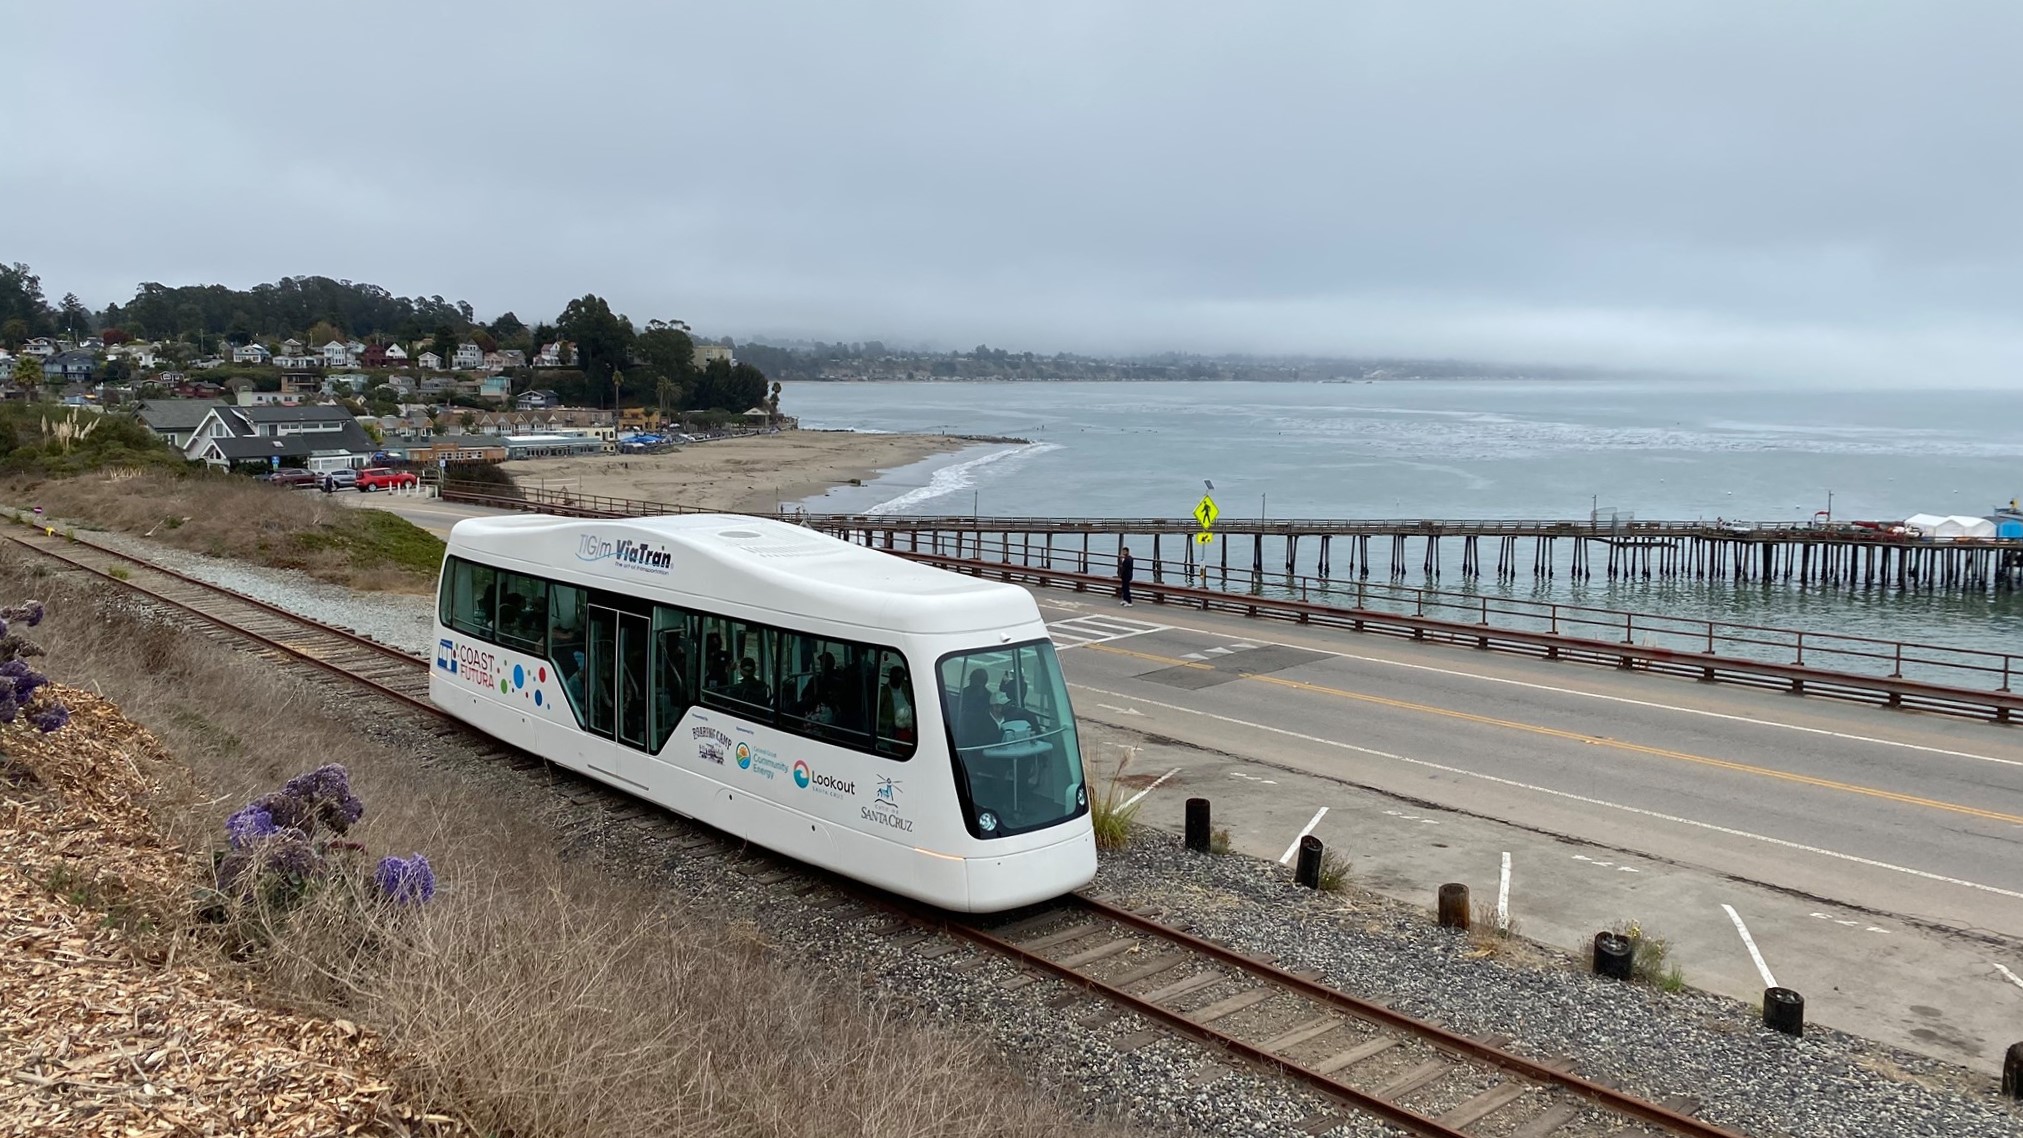 A proposed option for passenger rail was debuted in 2021. A photo shows the single train car on the rail line with the Capitola Pier in the background.